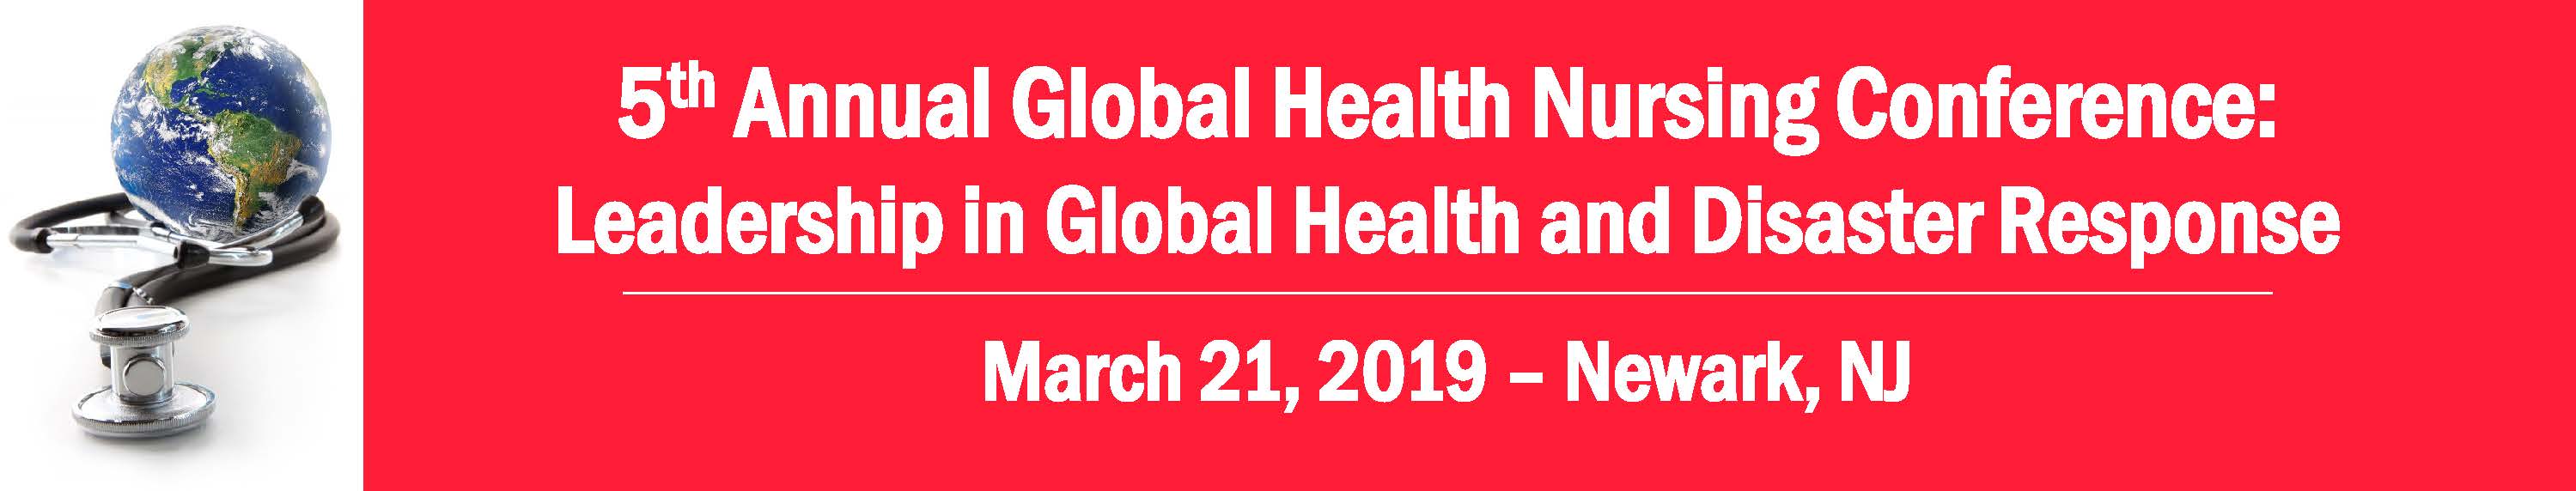 5th Annual Global Health Conference: Leadership in Global Health and Disaster Response Banner